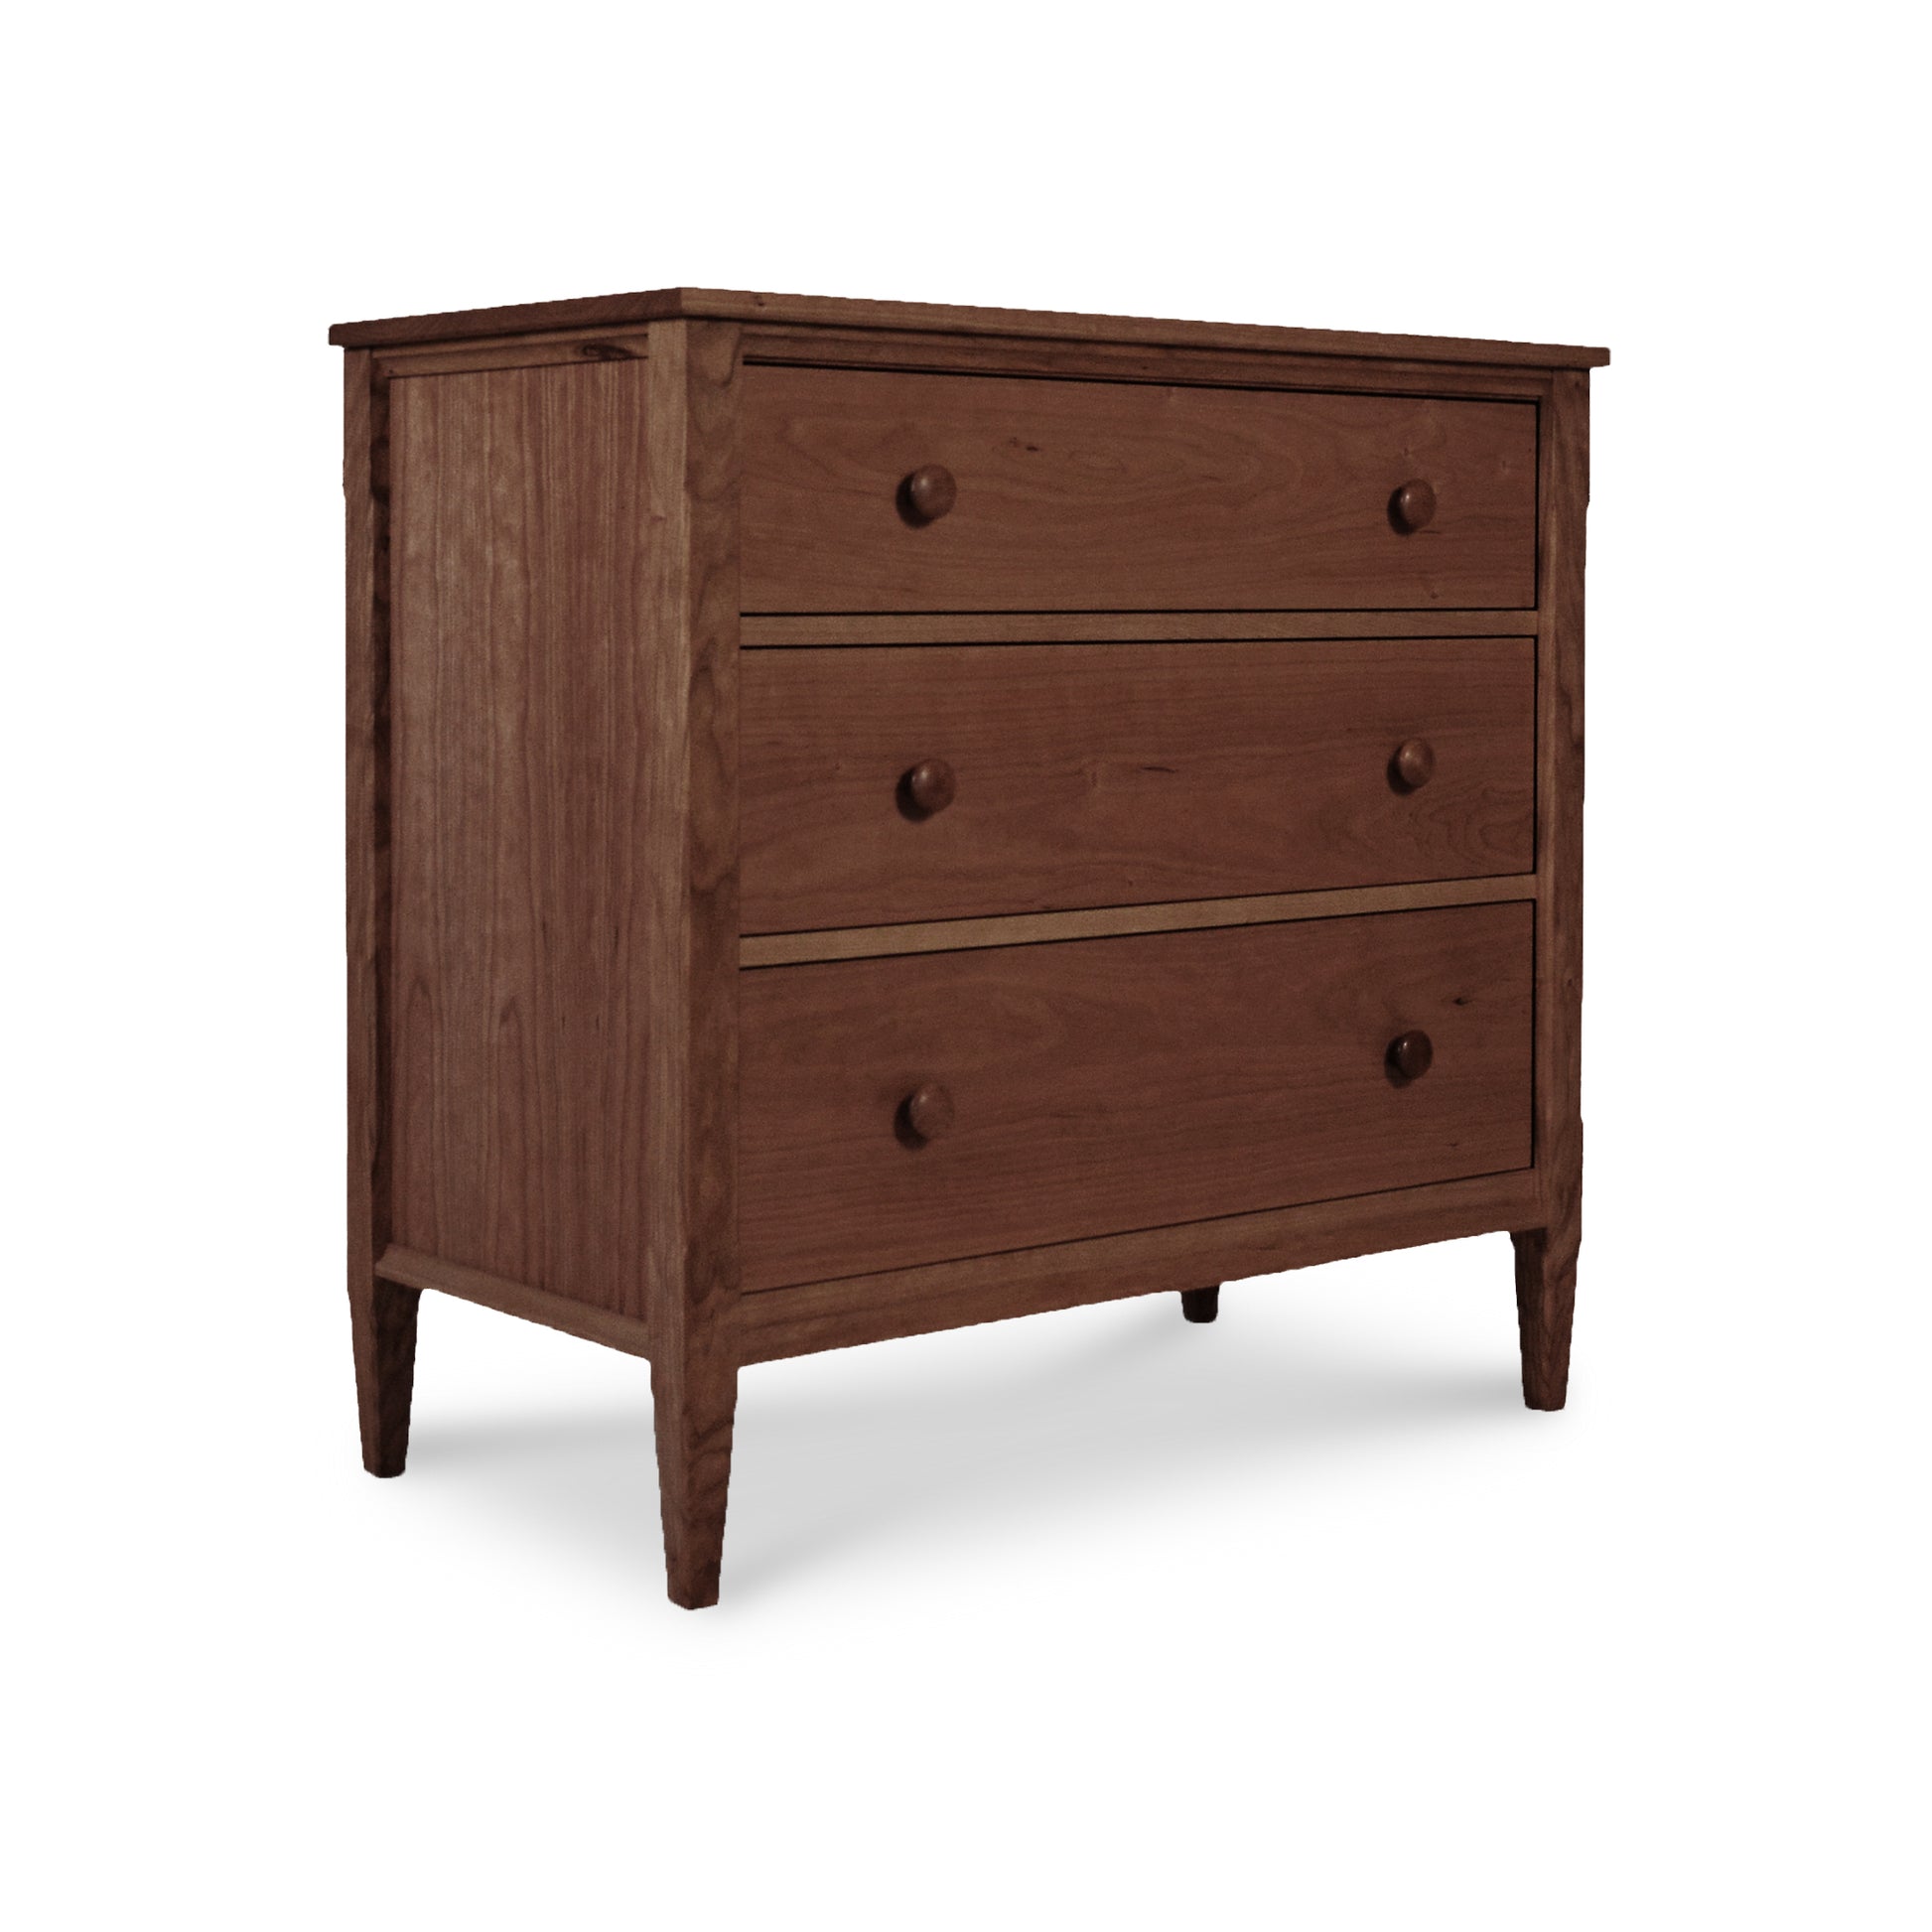 A Vermont Shaker 3-Drawer Chest by Maple Corner Woodworks, with a simple design and tapered legs, isolated on a white background.